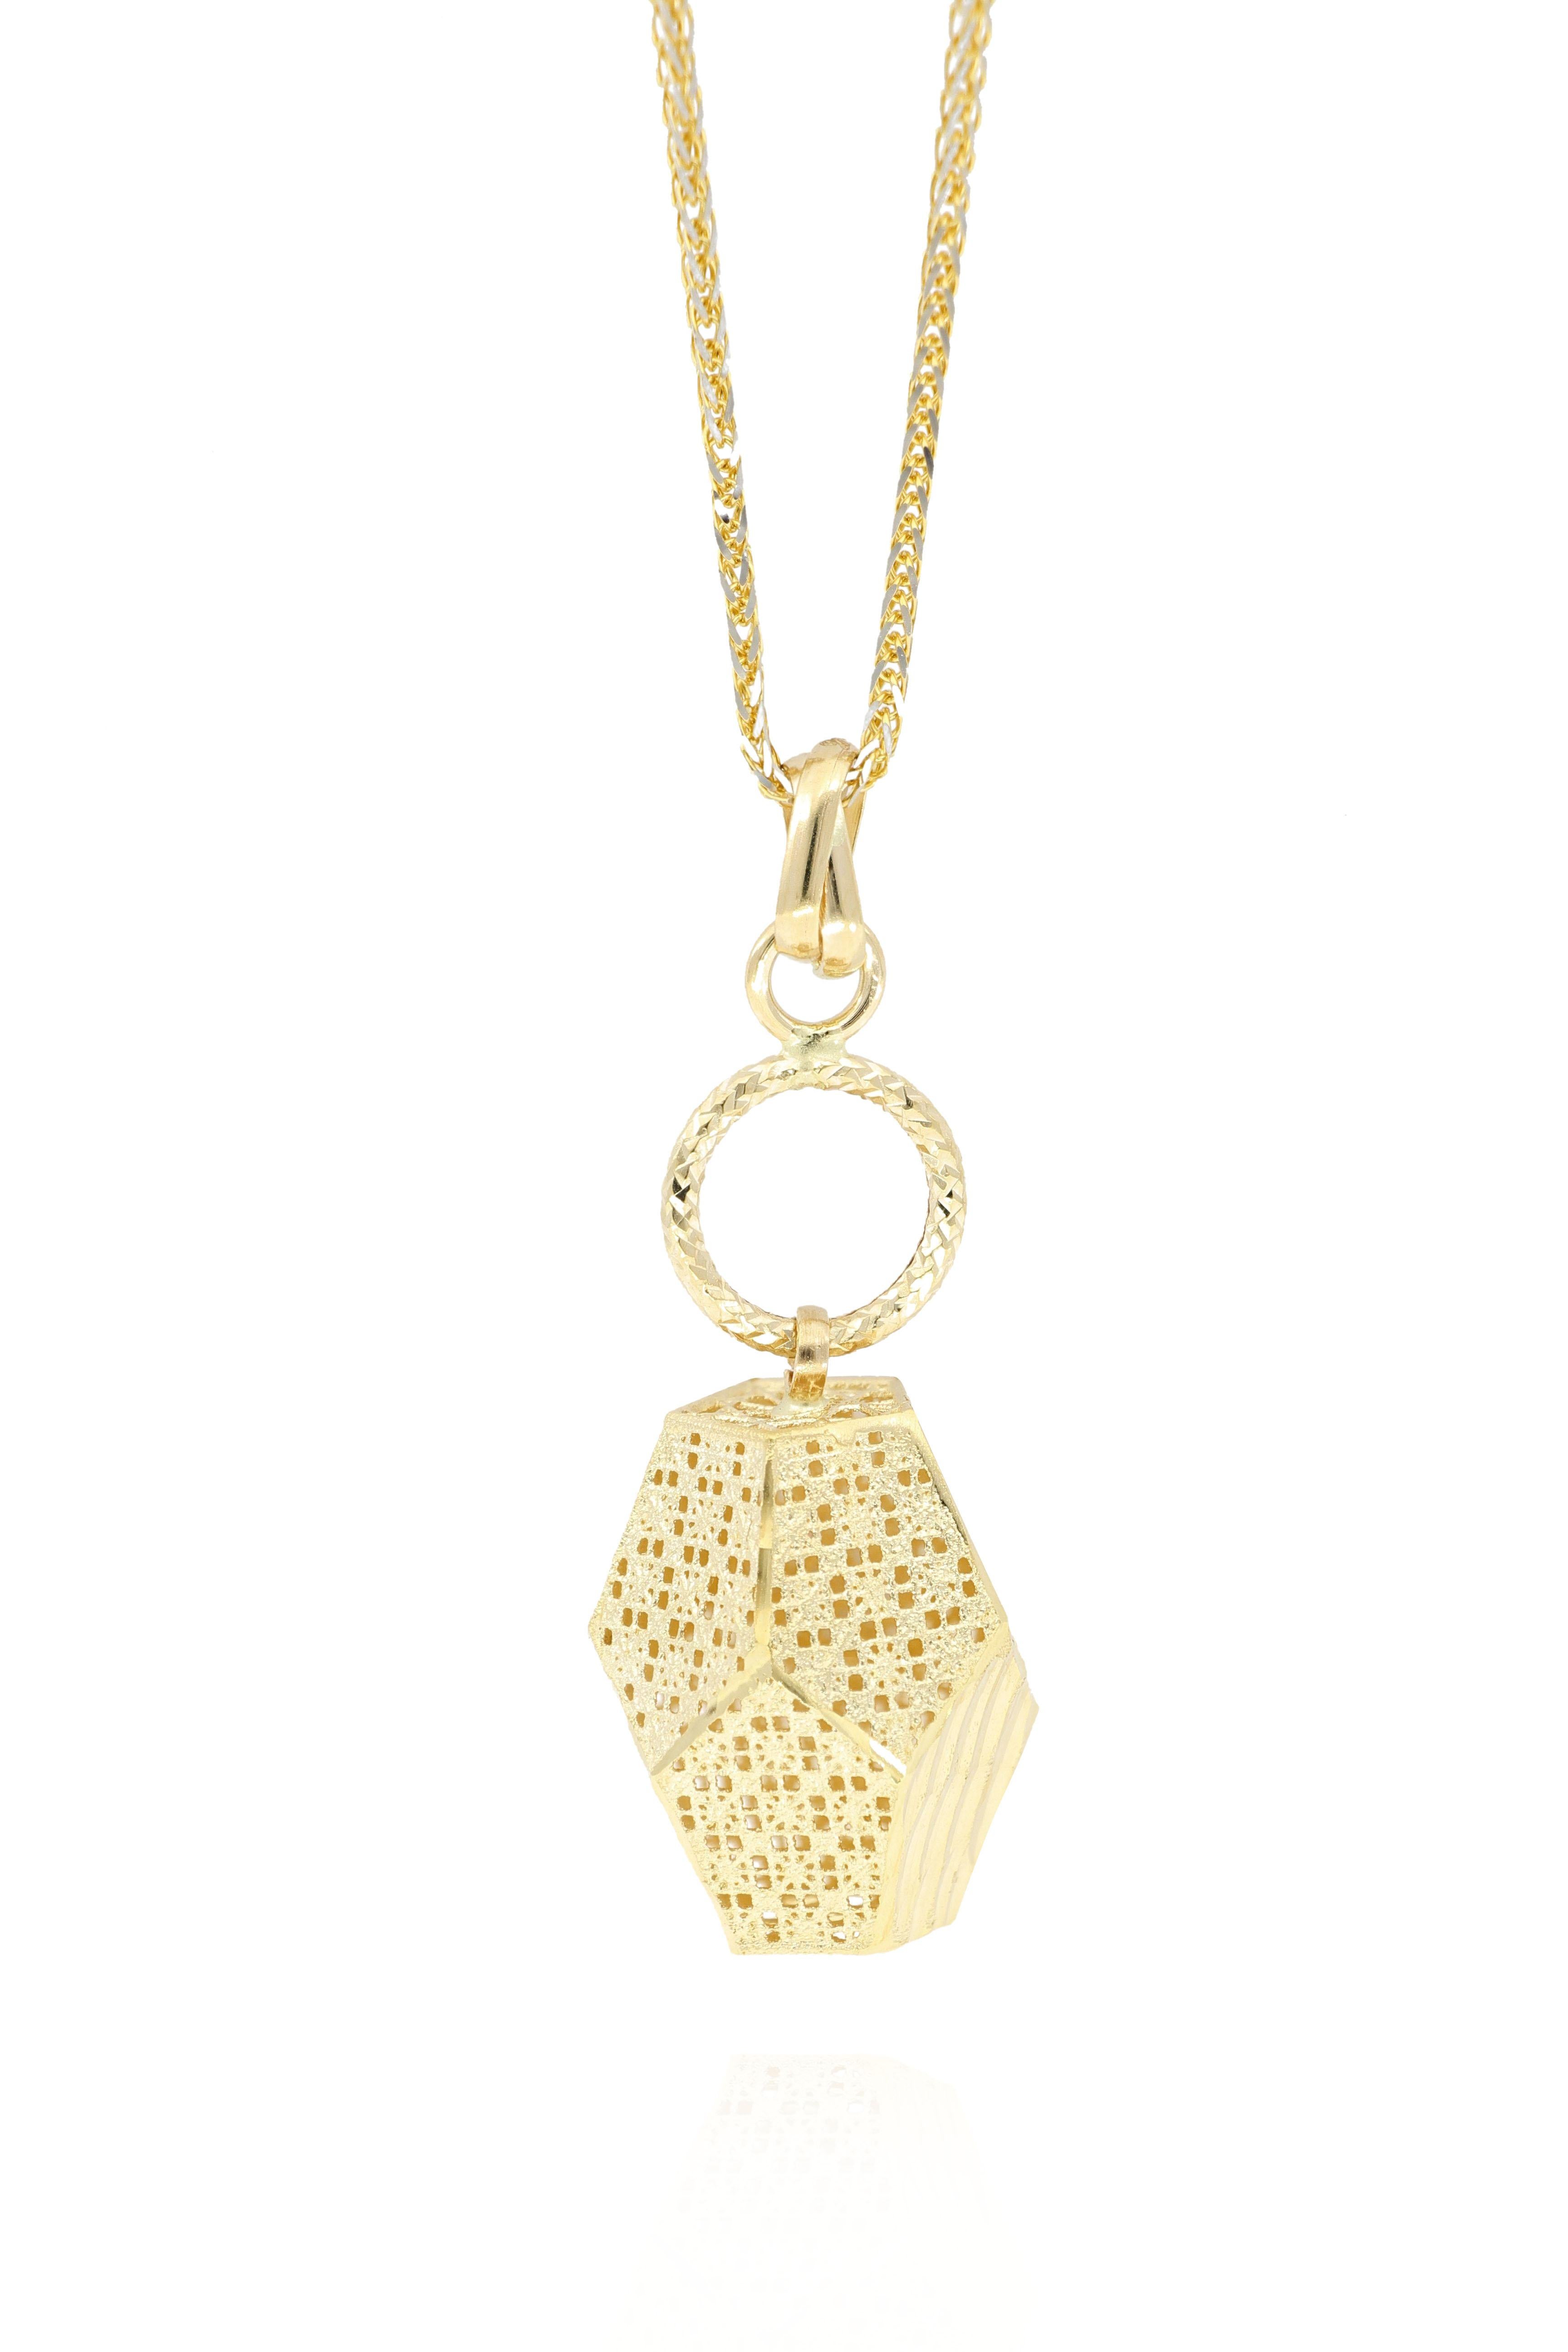 This beutiful pendant necklace, designed and made in Italy,  is a three-dimensional dodecahedron, with floral carvings on the surface in 18K yellow gold.
The company was founded one and a half centuries ago in Macau. The brand is renowned for its